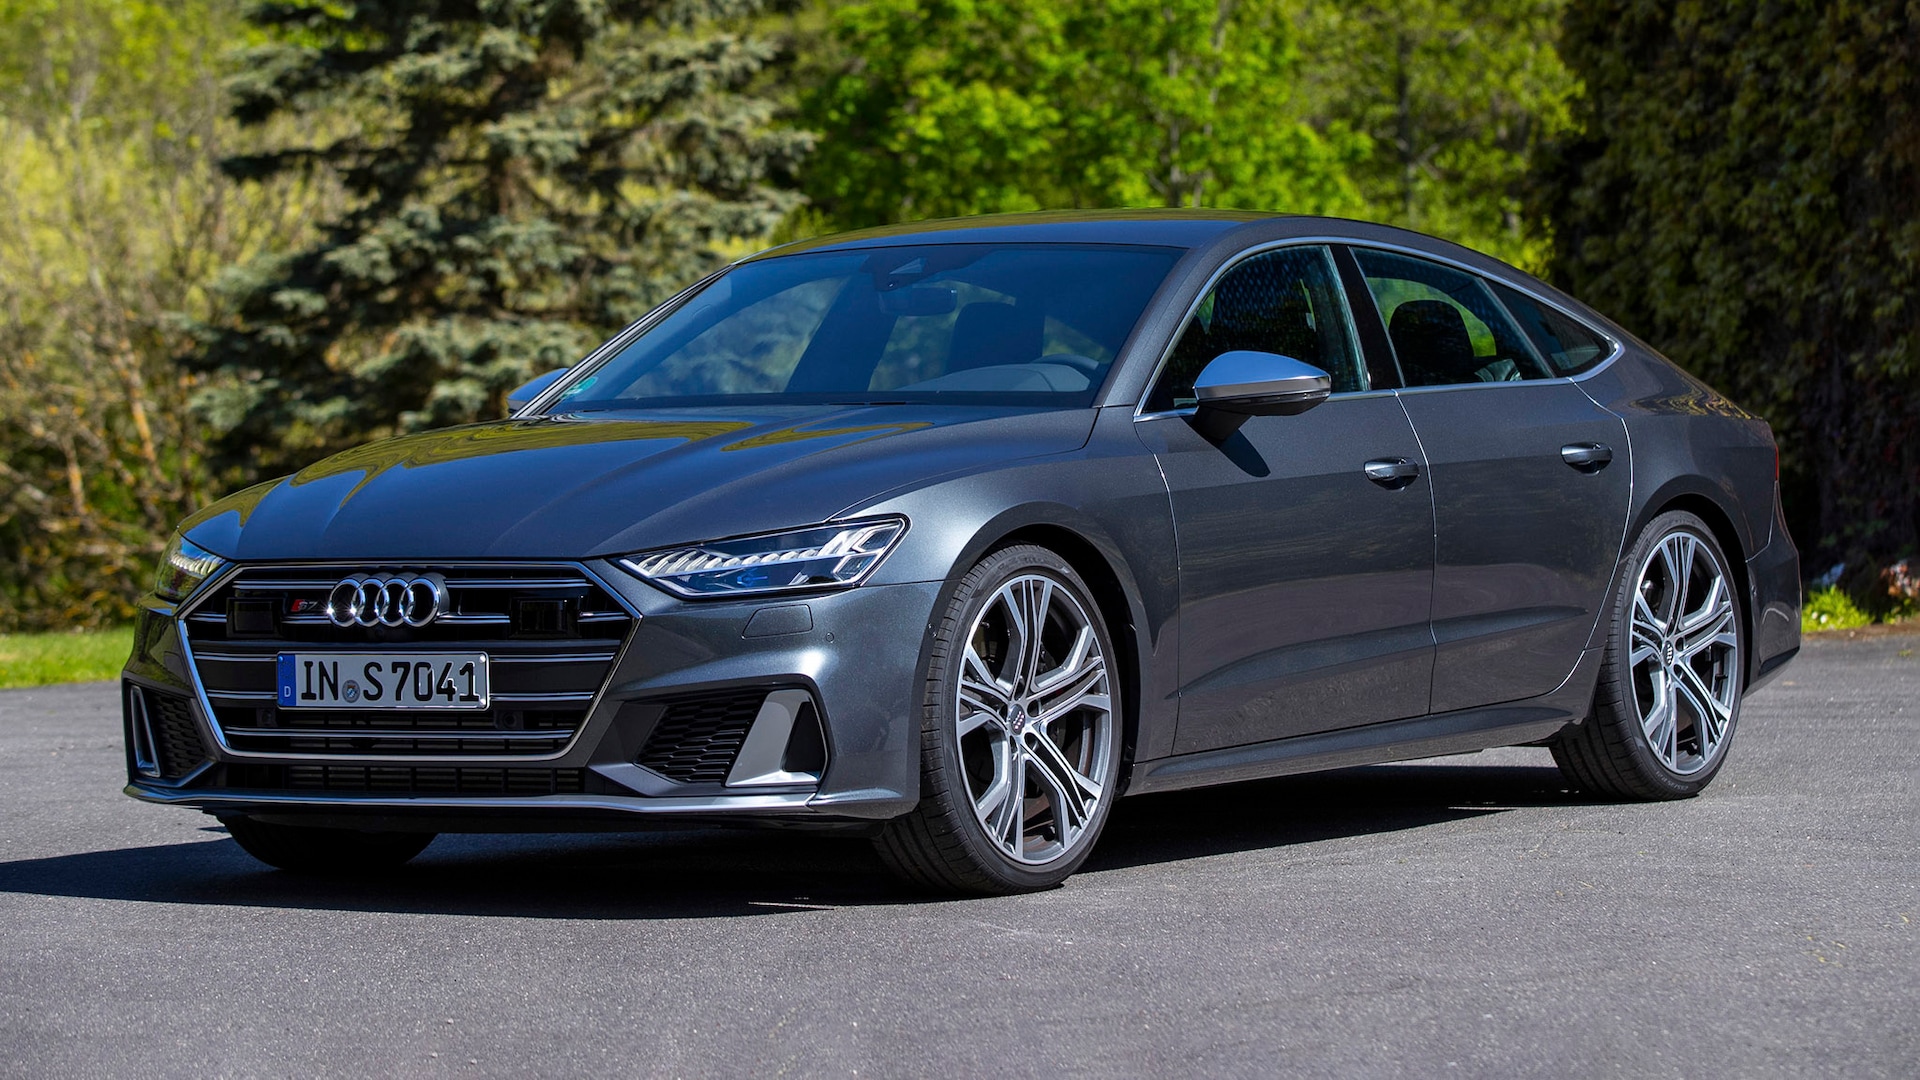 2023 Audi S7 Prices, Reviews, and Photos - MotorTrend